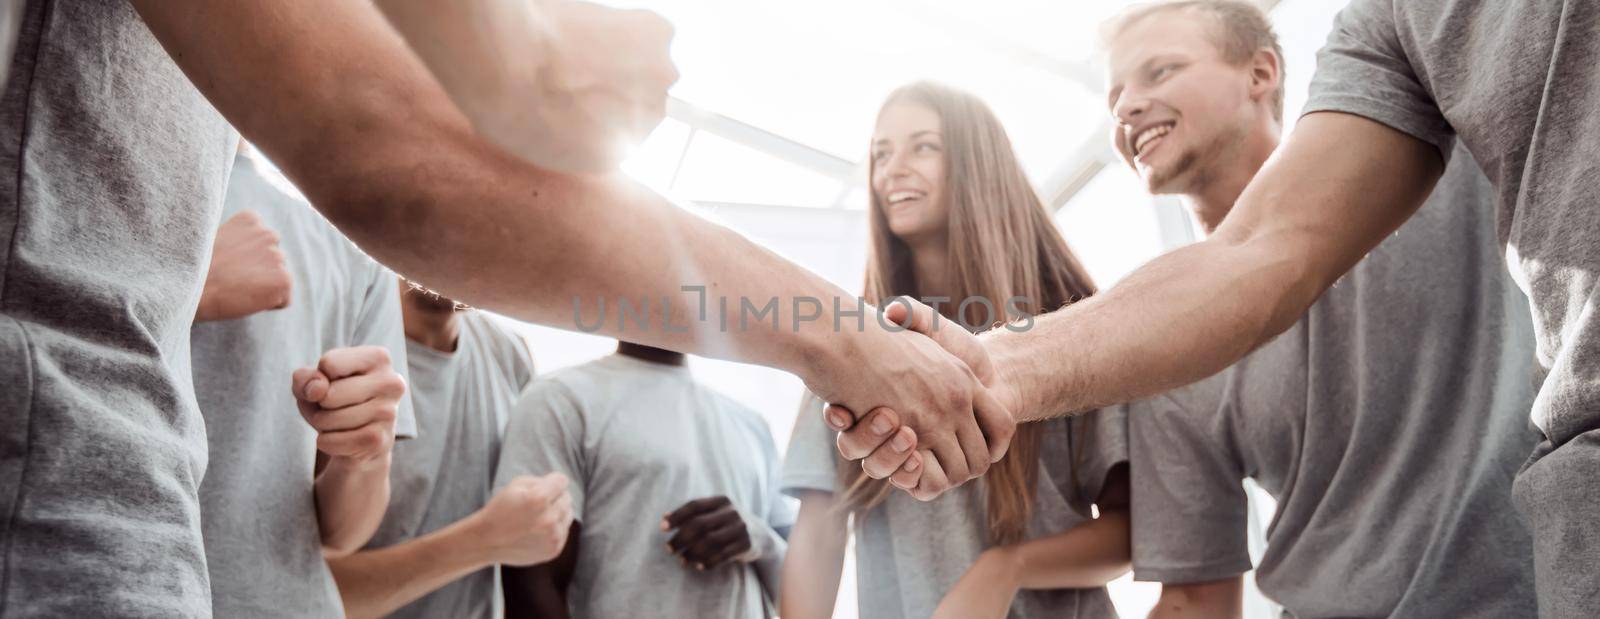 bottom view. handshake of young people in a circle of friends